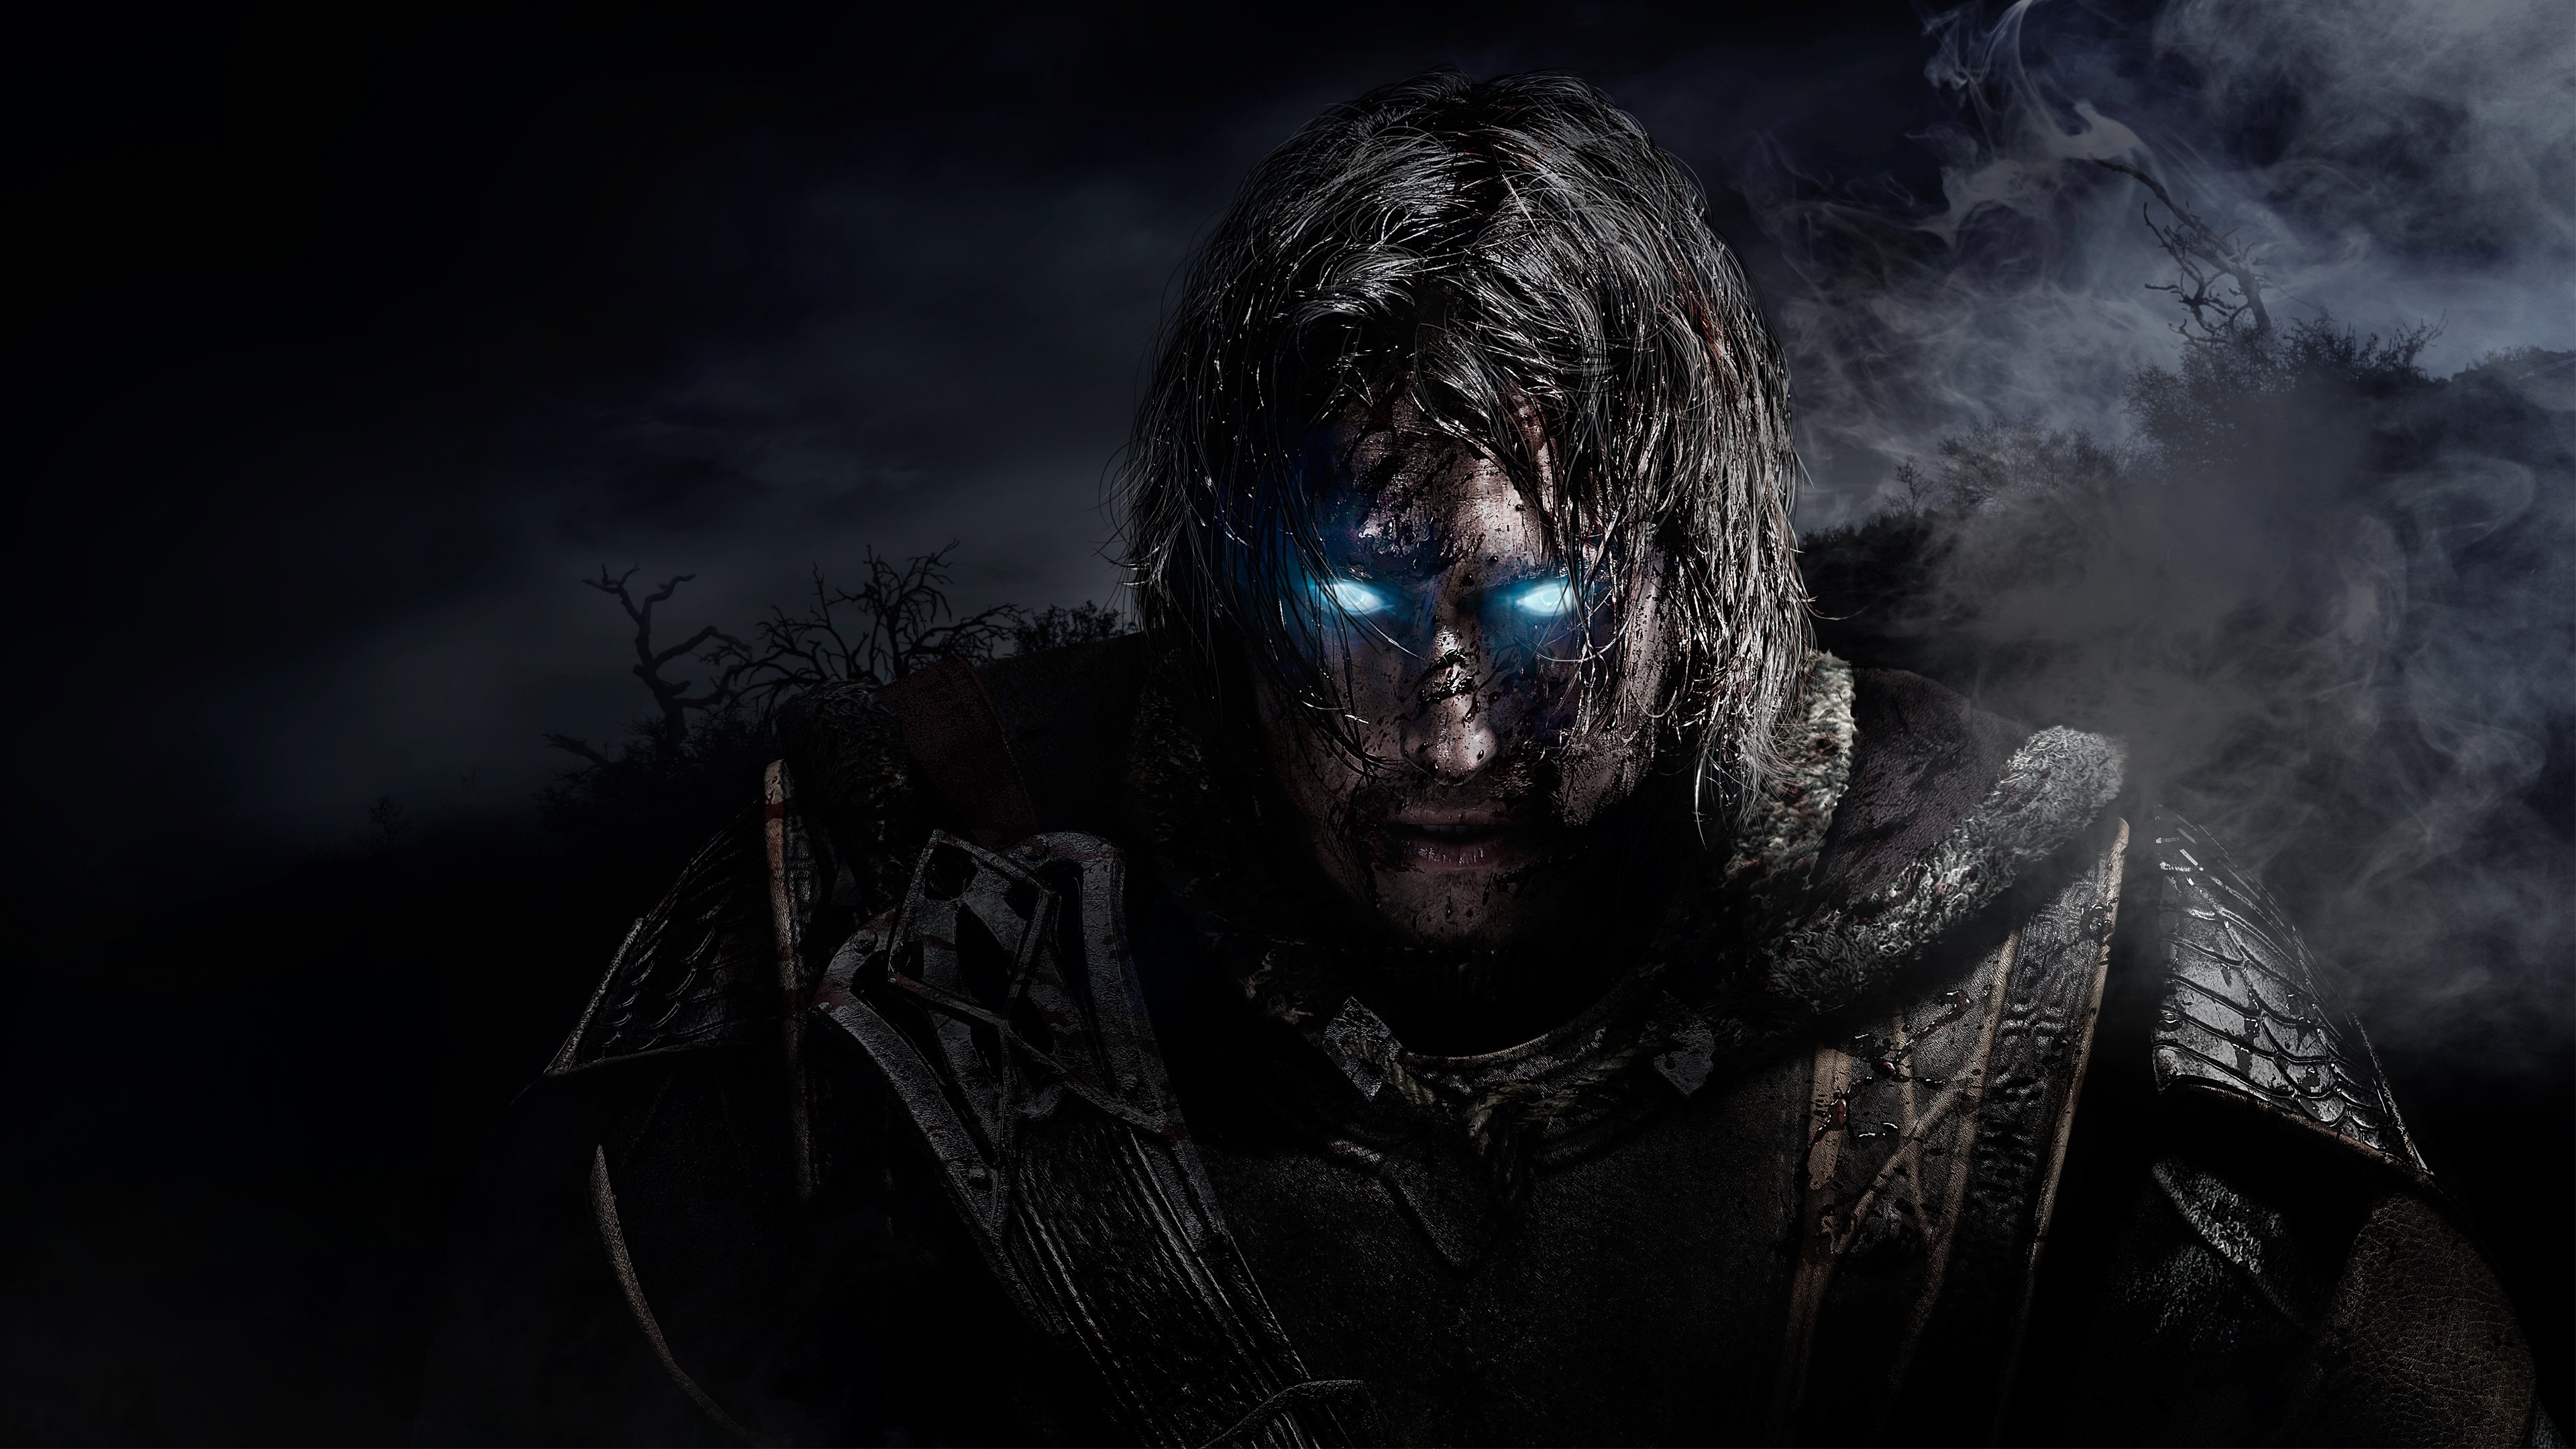 3840x2160 ... Wallpapers 4k Gaming Wallpaper Middle Earth Shadow Of Mordor | HD  Widescreen Hd Desktop Backgrounds gaming ...